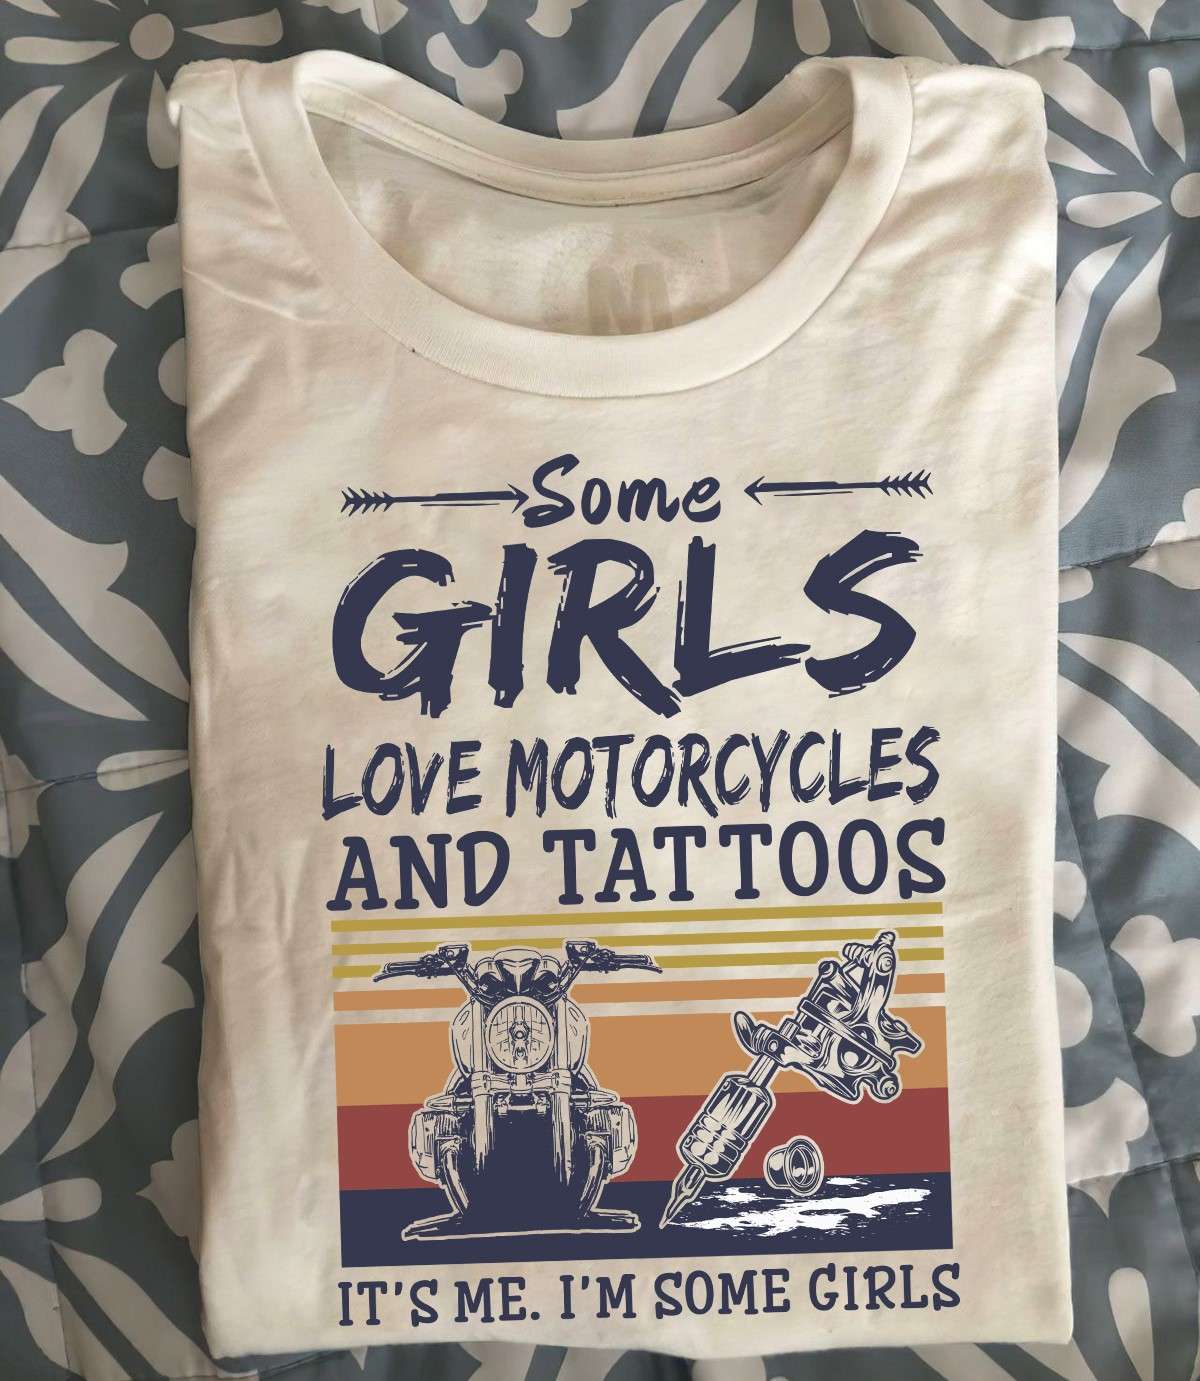 Some girls love motorcycle and tattoos - Tattooed girls, girl bikers